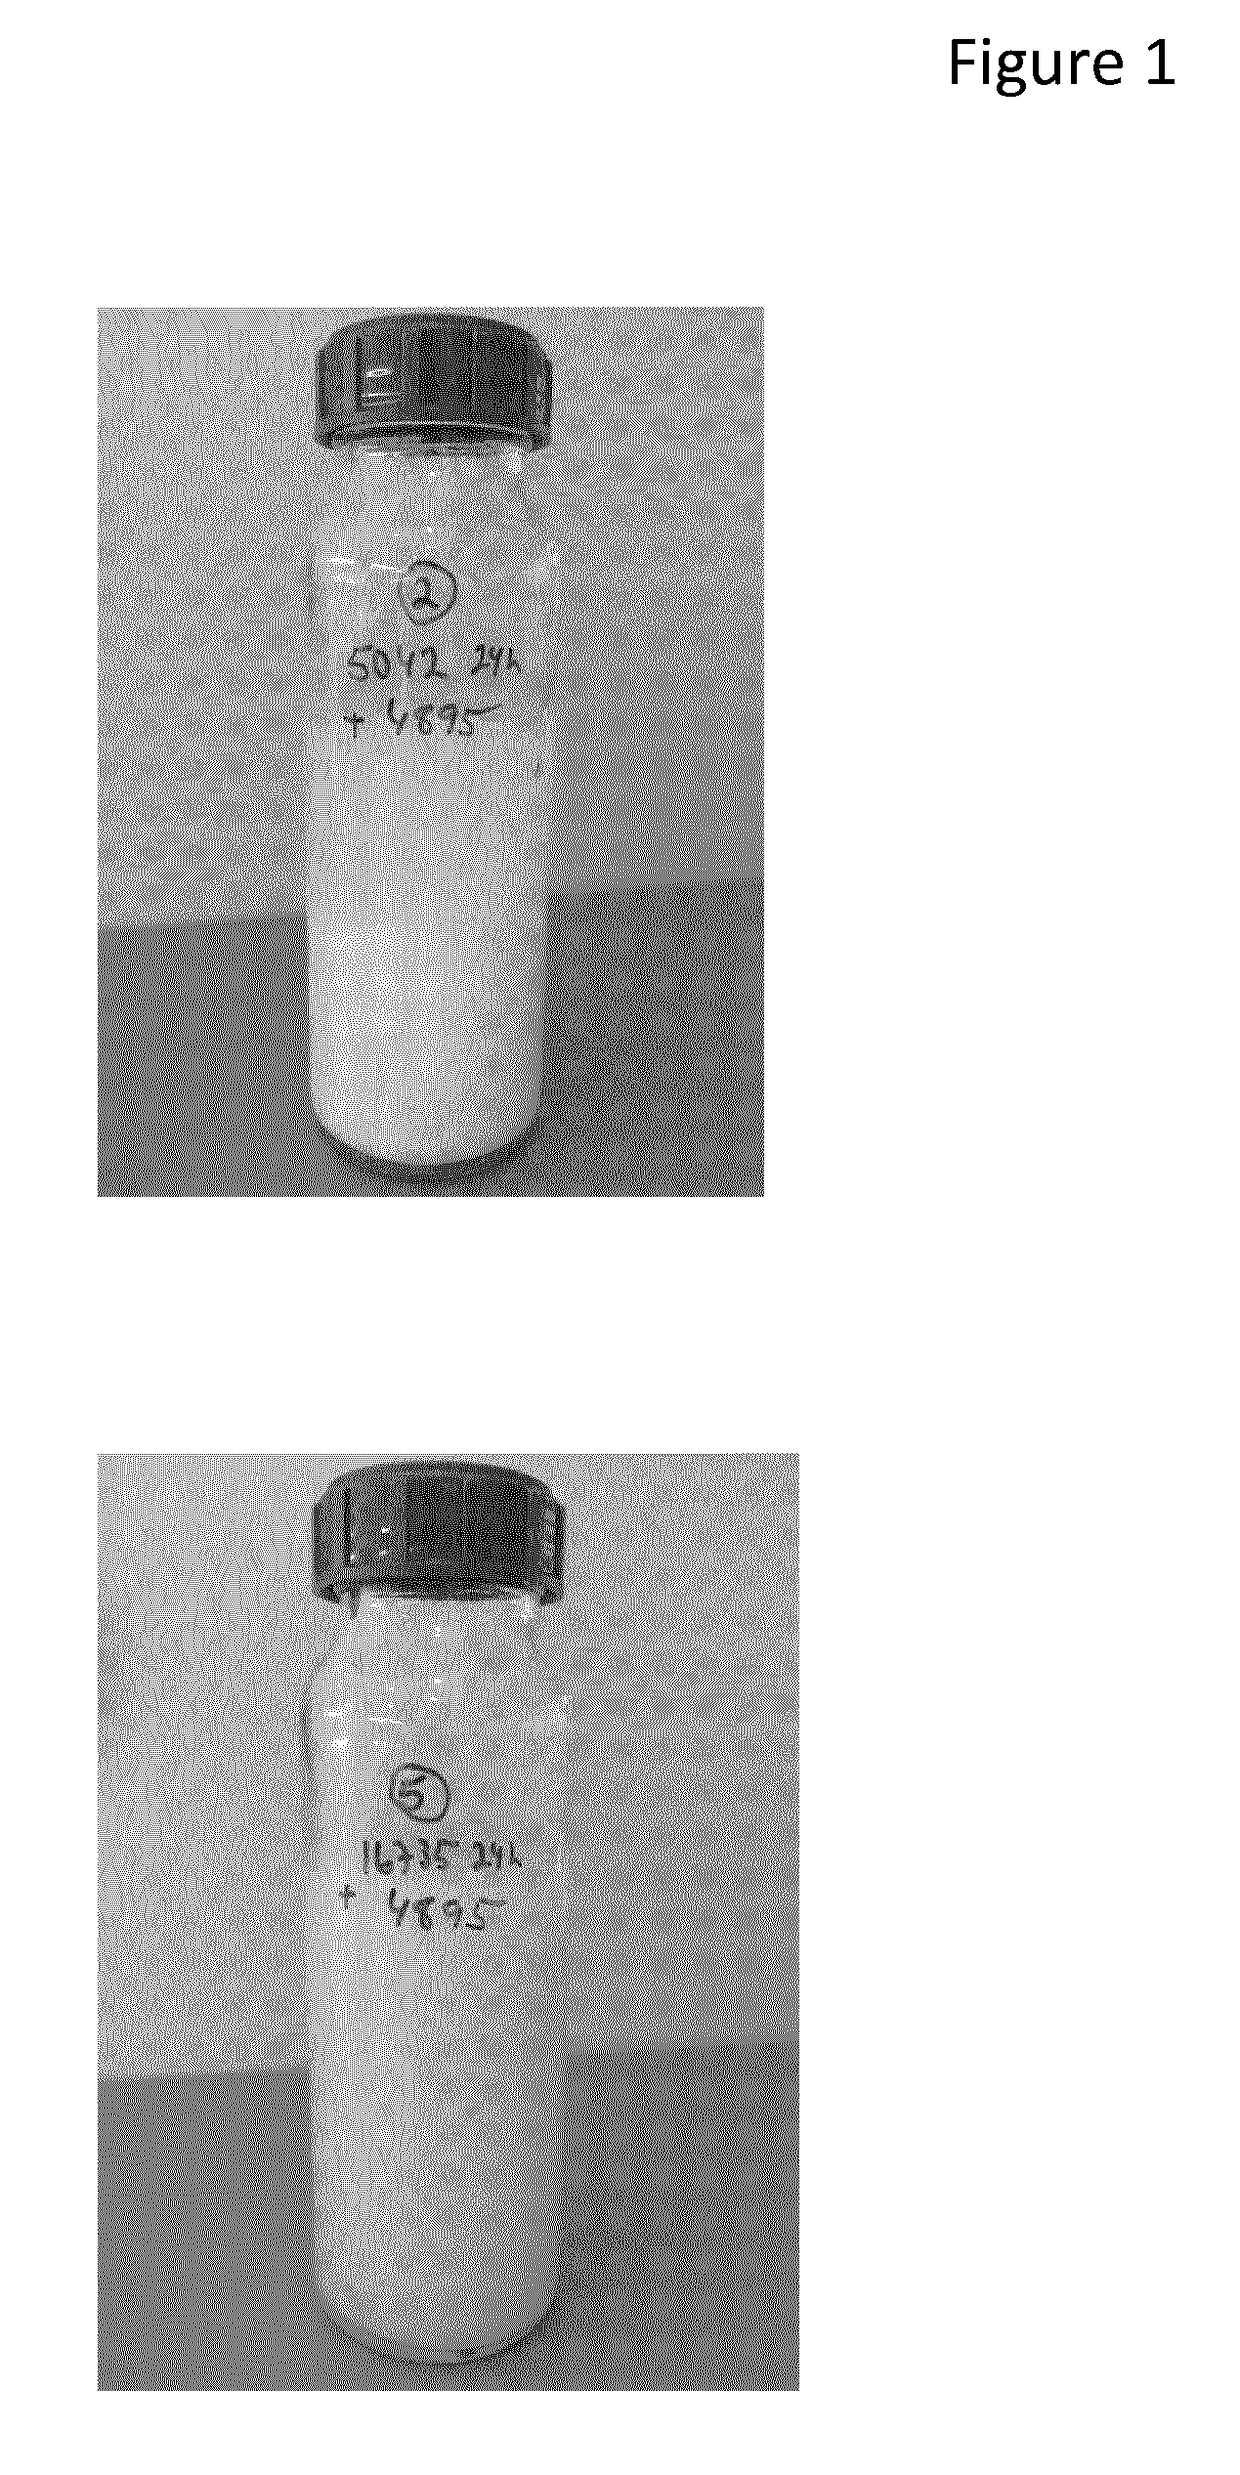 Fermented milk inoculated with both lactic acid bacteria (LAB) and bacillus